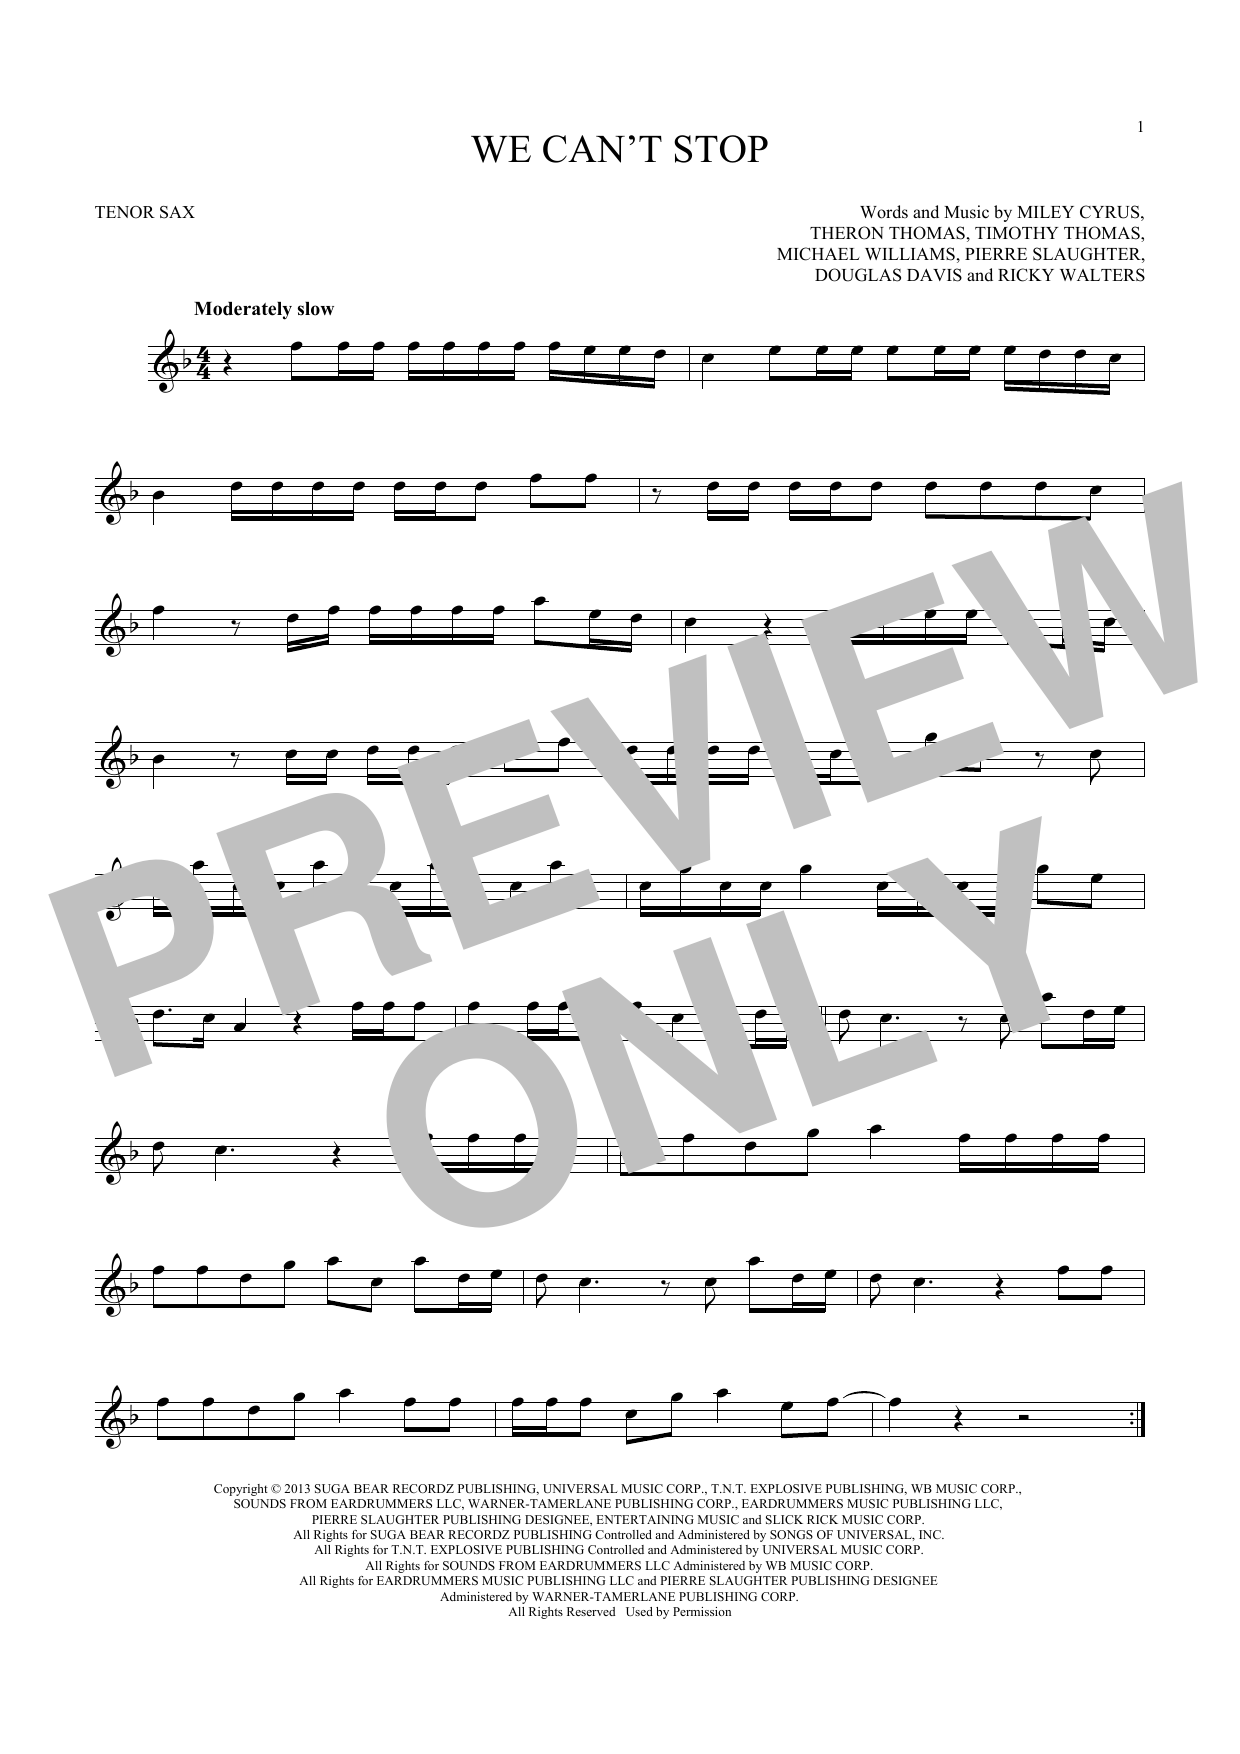 Download Miley Cyrus We Can't Stop Sheet Music